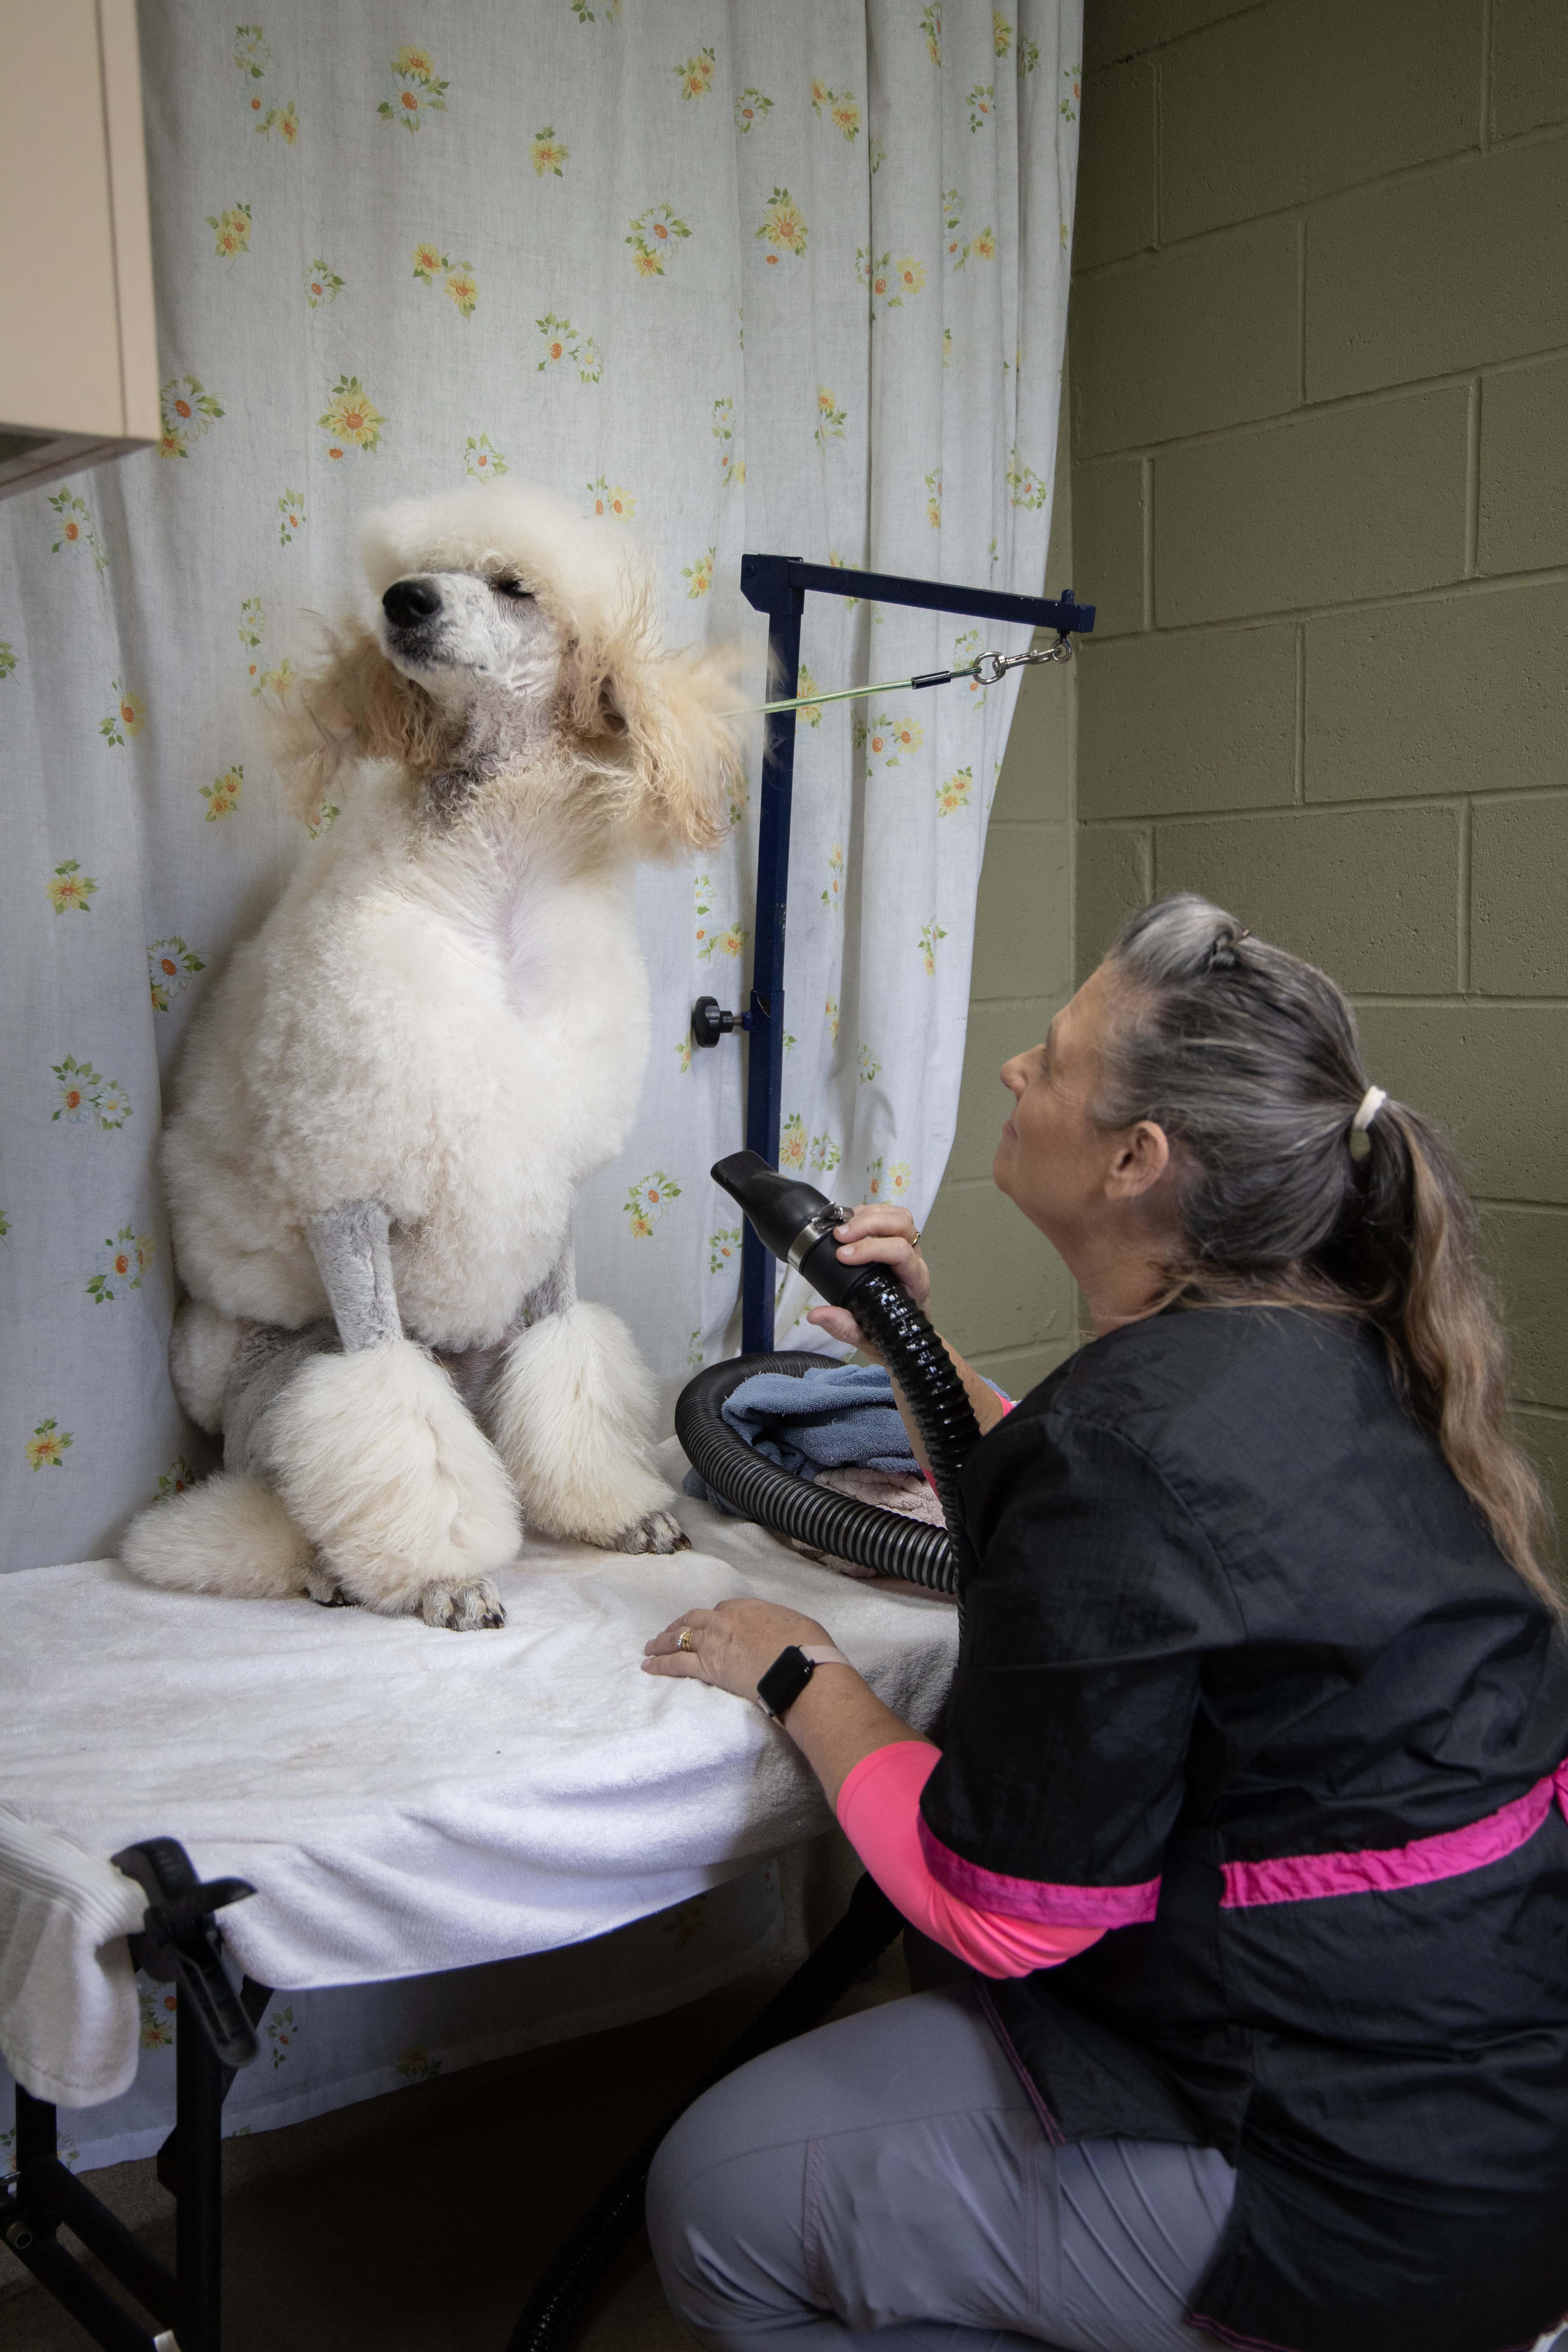 We offer complete professional grooming for all breeds of dogs and cats at our clinic. Certain breeds—especially those with long hair that mats easily—may need assistance keeping themselves clean. Animals that are older or have physical disabilities may also benefit from our grooming services.